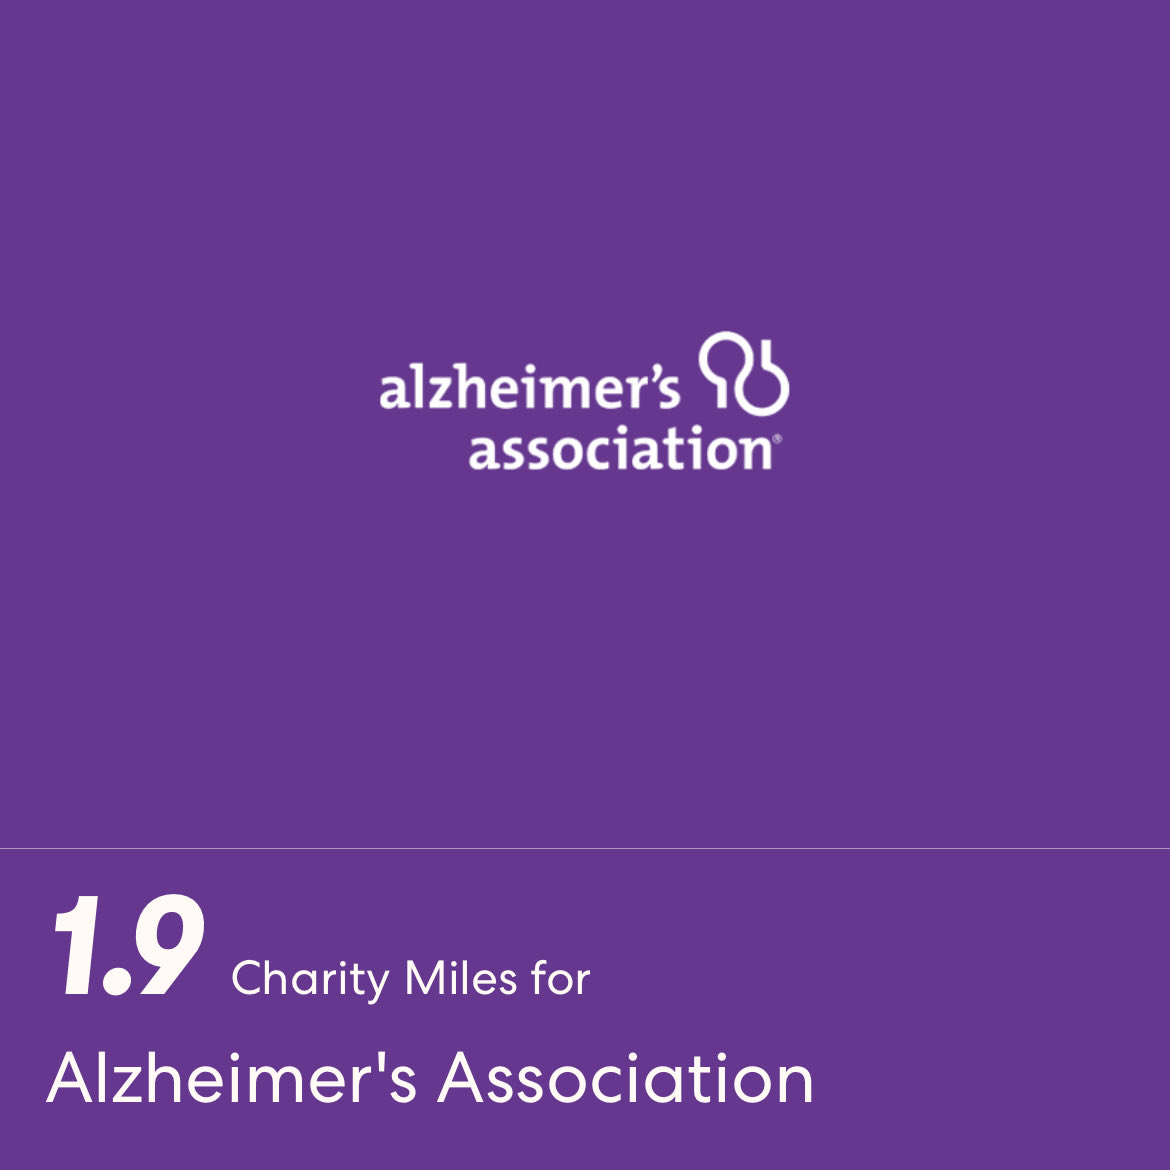 1.9 Charity Miles for Alzheimer's Association. I’d be grateful for your support. If you’re in a position to do so, please click here to sponsor me. miles.app.link/e/xyrYBy0U3tb